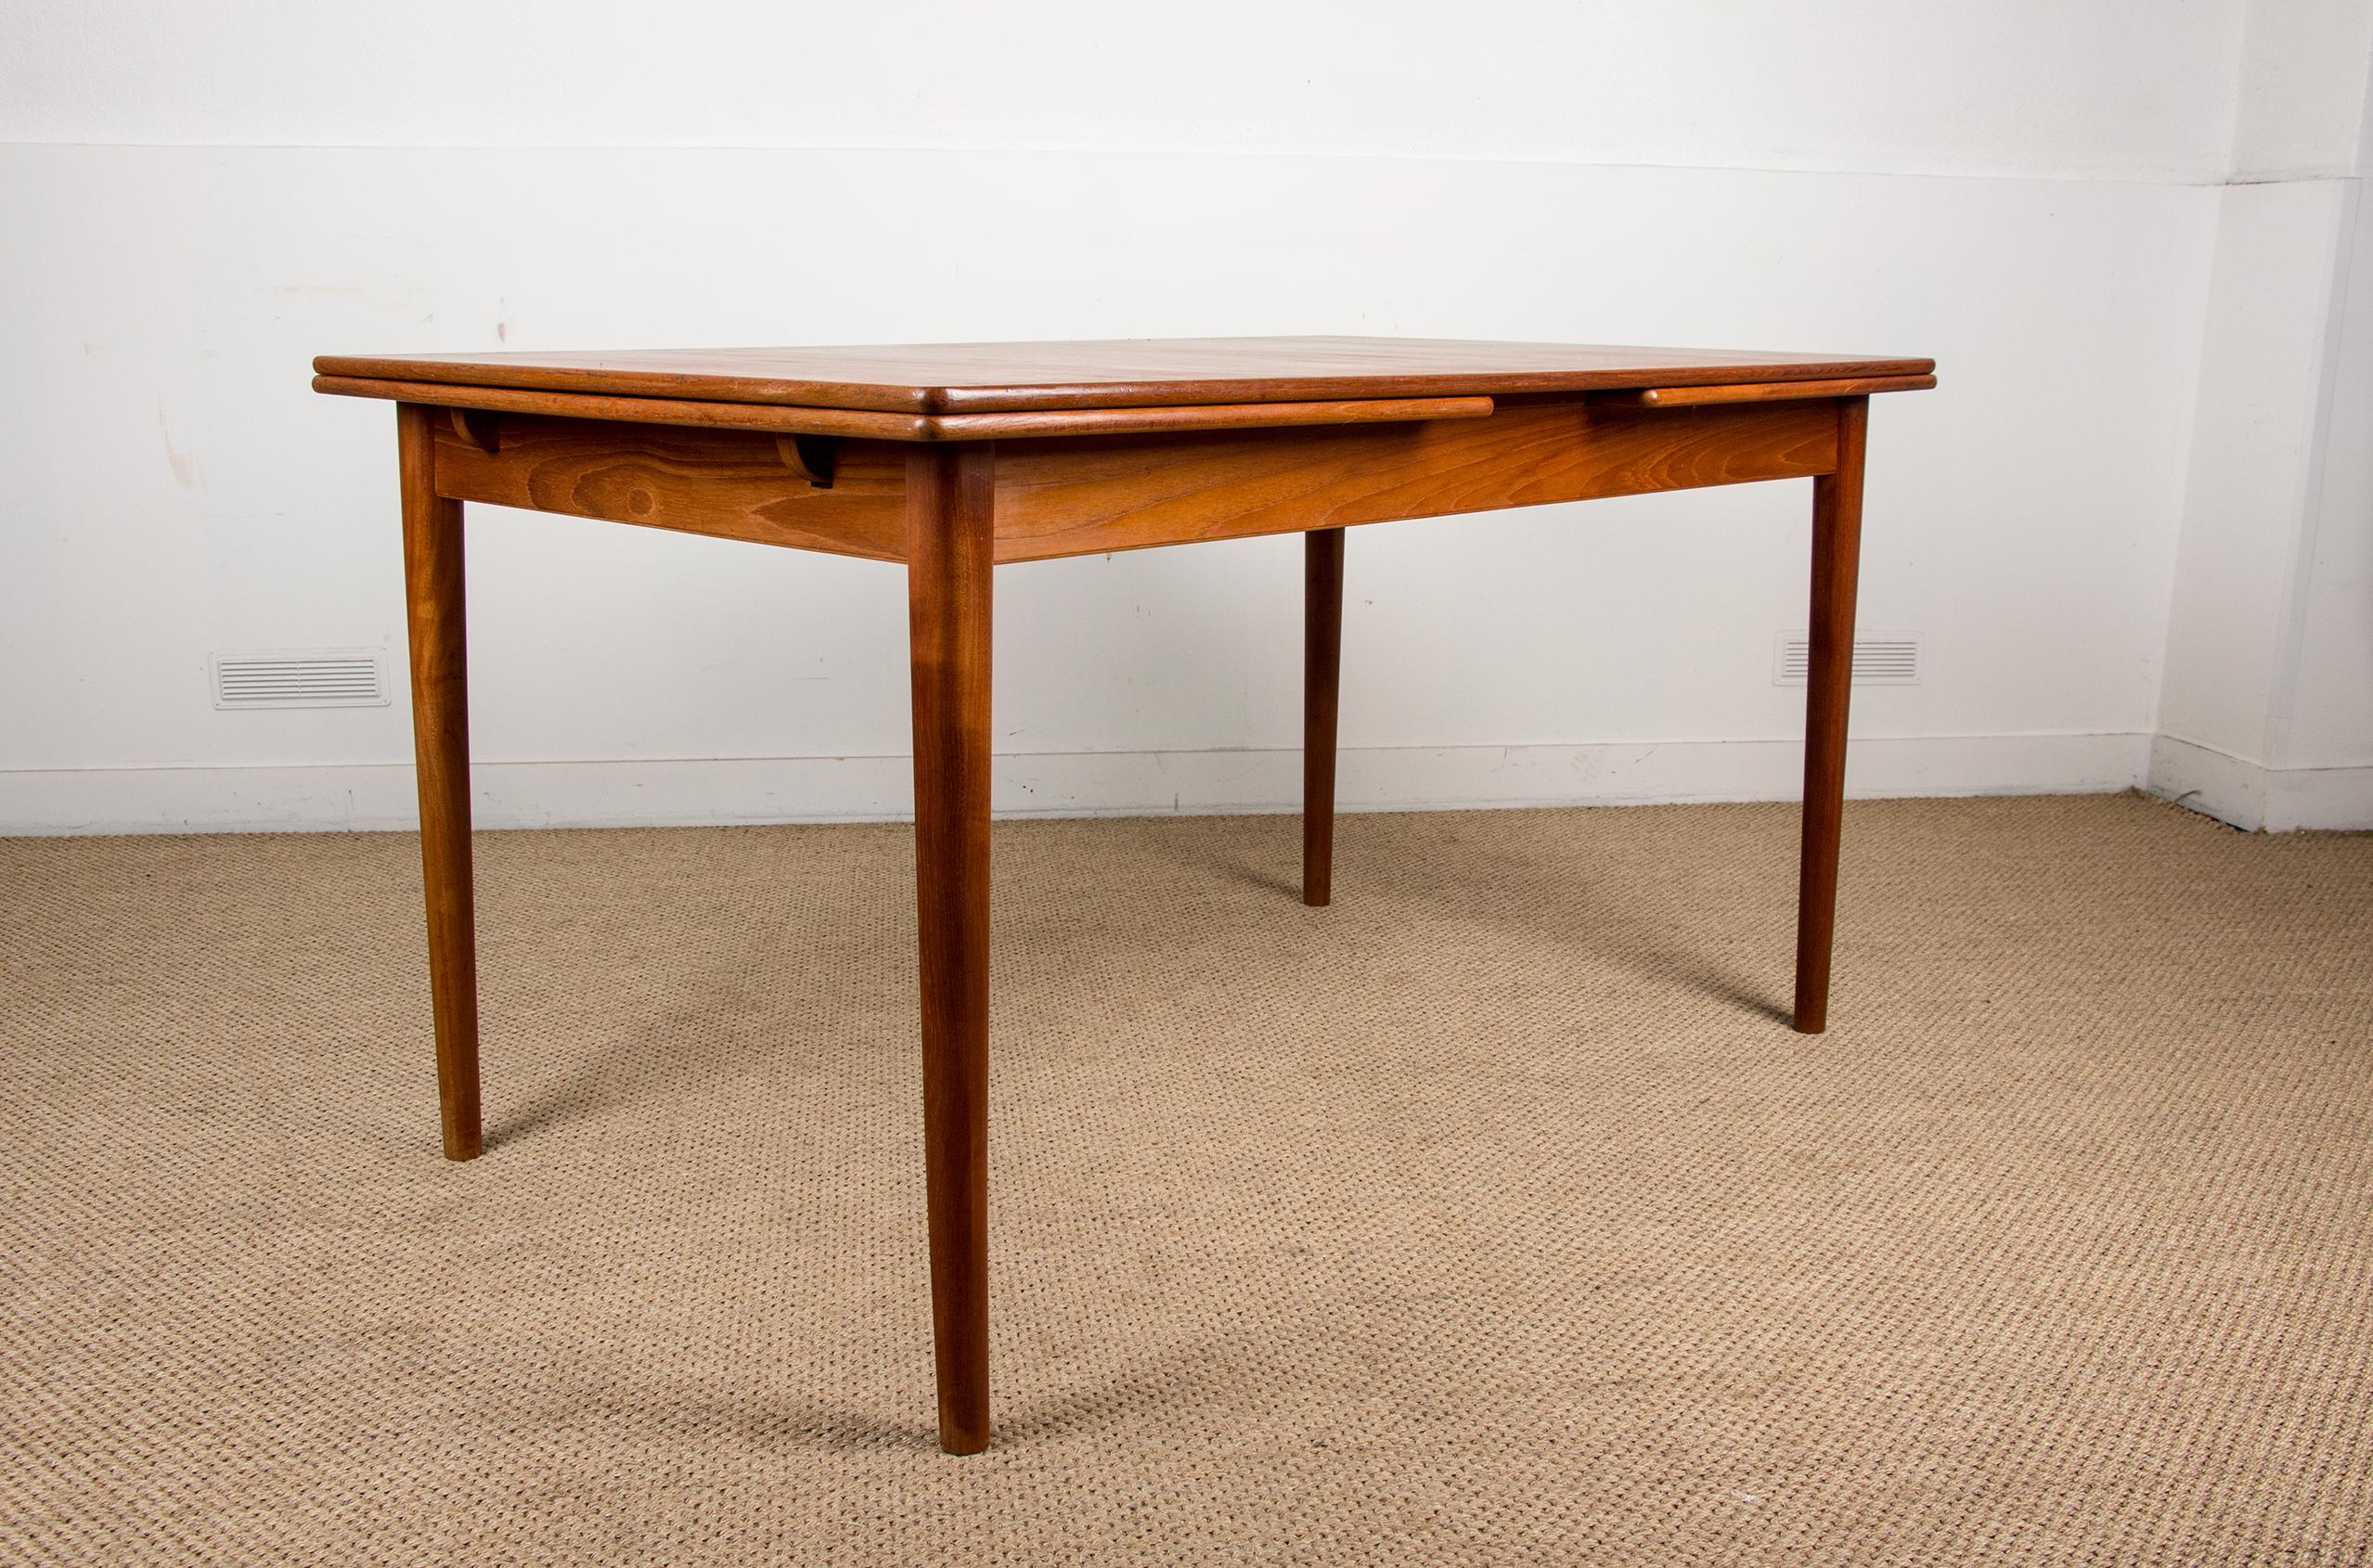 Mid-20th Century Swedish Extendable Dining Table in Teak by Nils Jonsson for Troeds